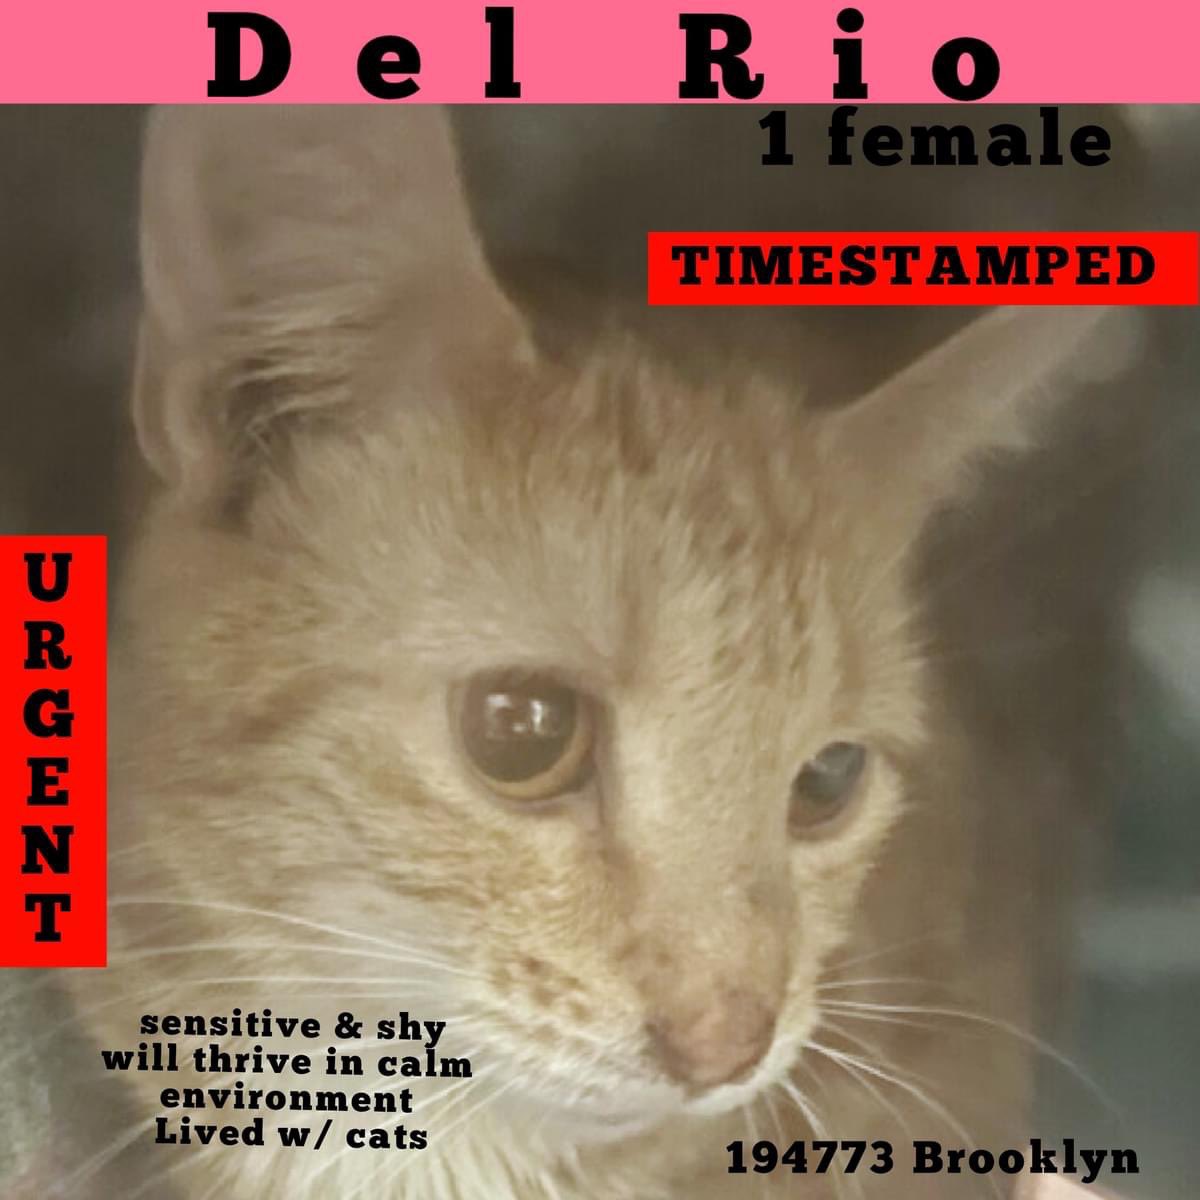 🆘Please RT-adopt-foster! 🆘 DEL RIO is on the “emergency placement” list at #ACCNYC and needs out of the shelter by 12 NOON 4/16! #URGENT #NYC #CATS #NYCACC #TeamKittySOS #AdoptDontShop #CatsOfTwitter newhope.shelterbuddy.com/Animal/Profile…